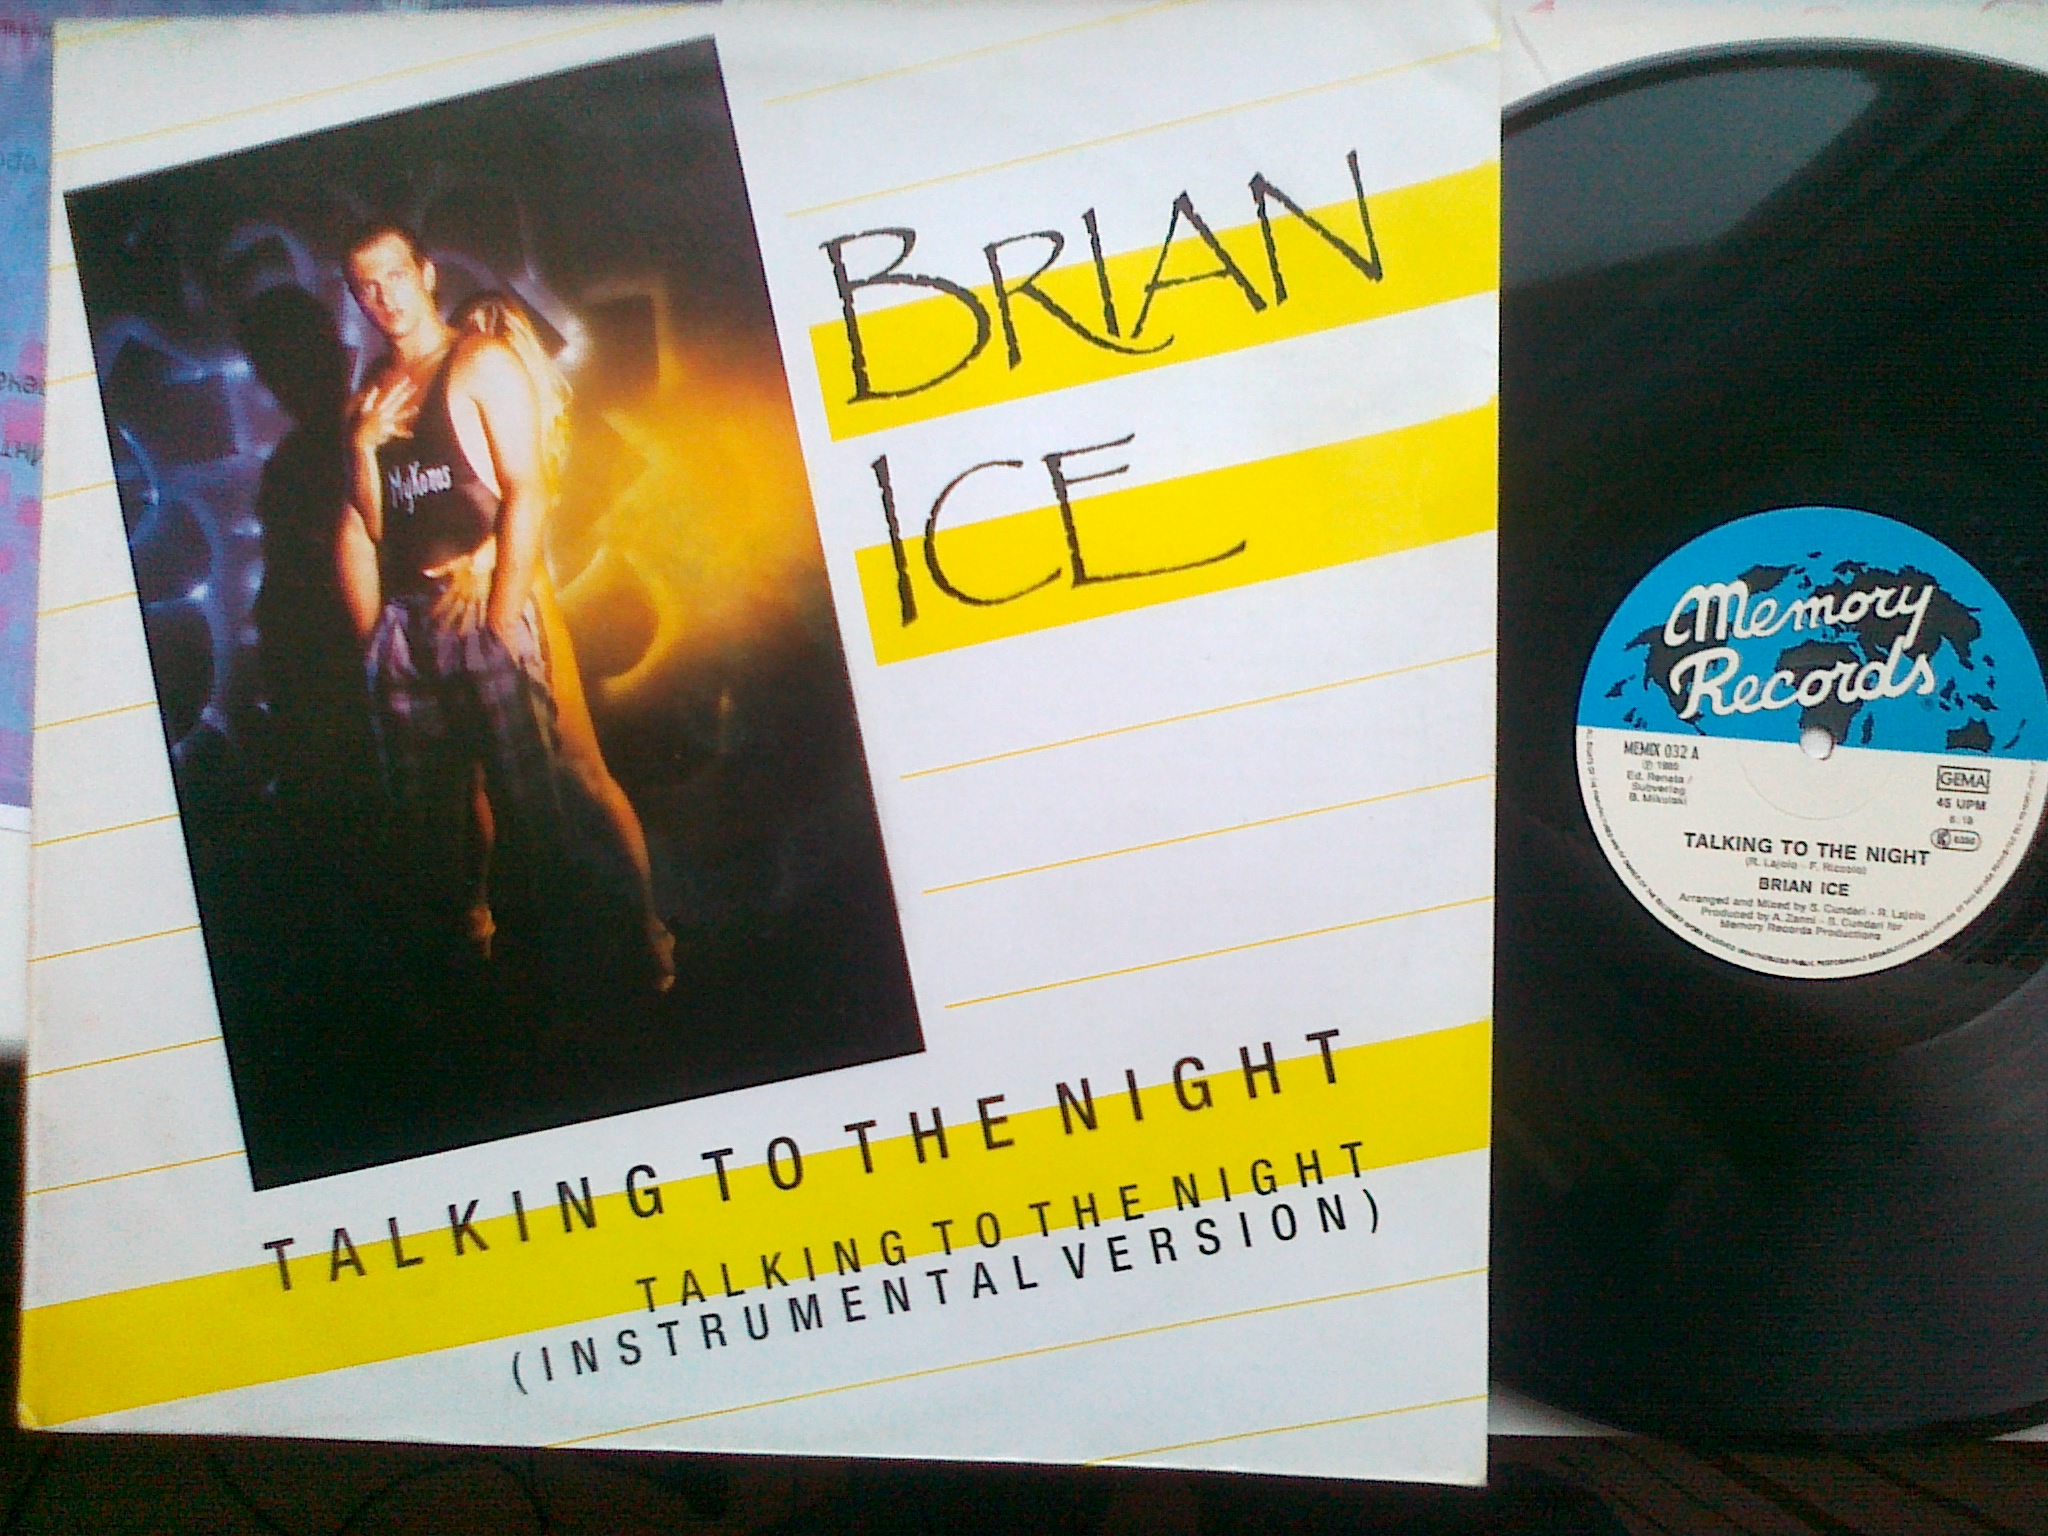 Brian Ice - Talking to the night